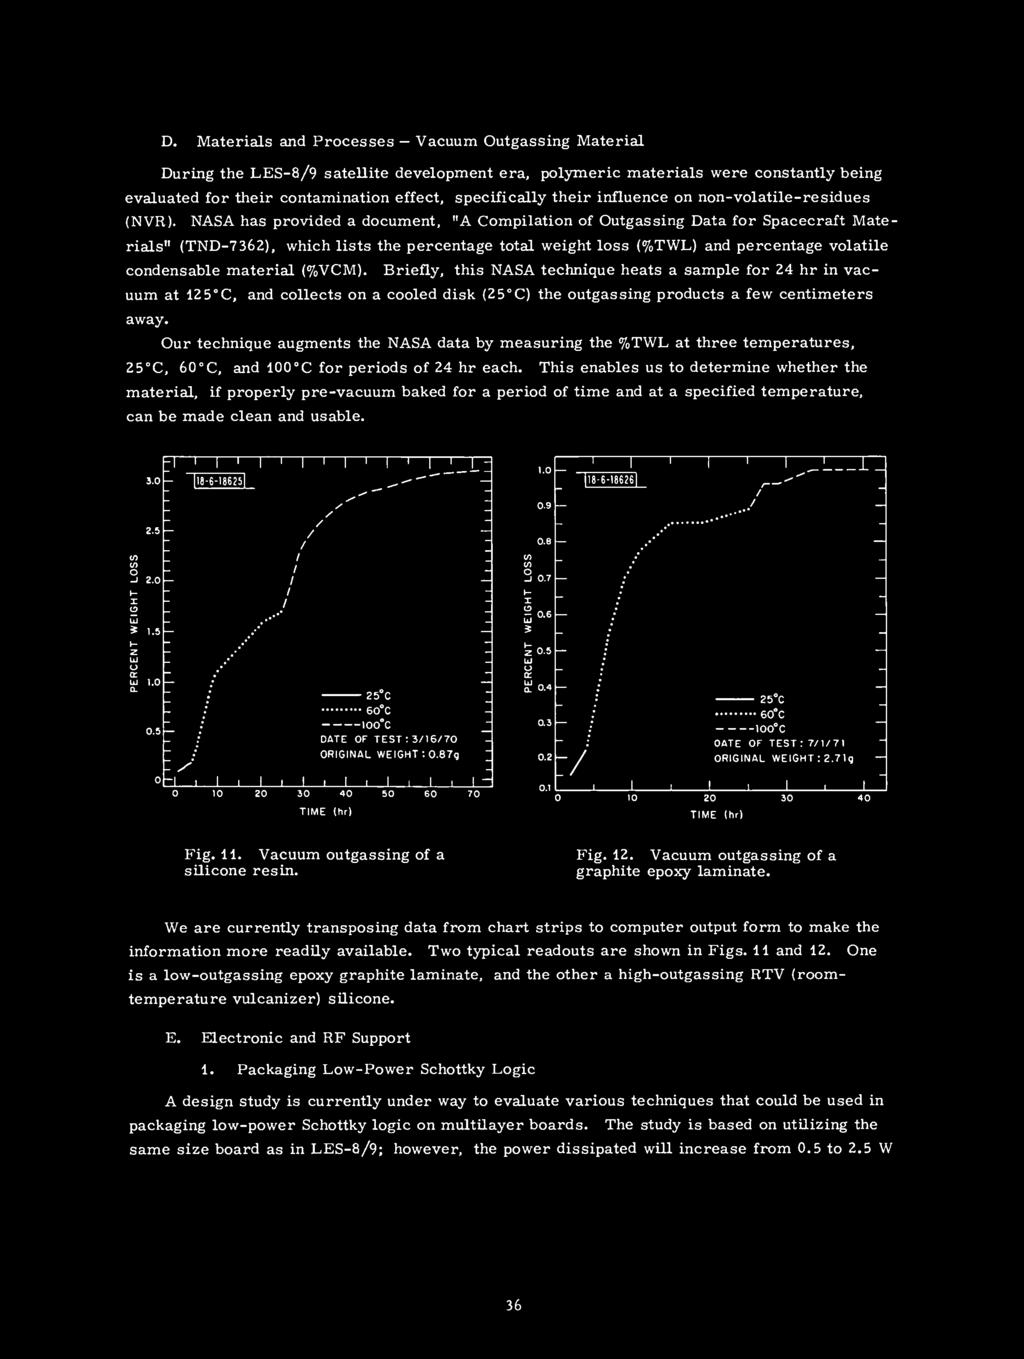 NASA has provided a document, "A Compilation of Outgassing Data for Spacecraft Mate- rials" (TND-7362), which lists the percentage total weight loss (%TWL) and percentage volatile condensable